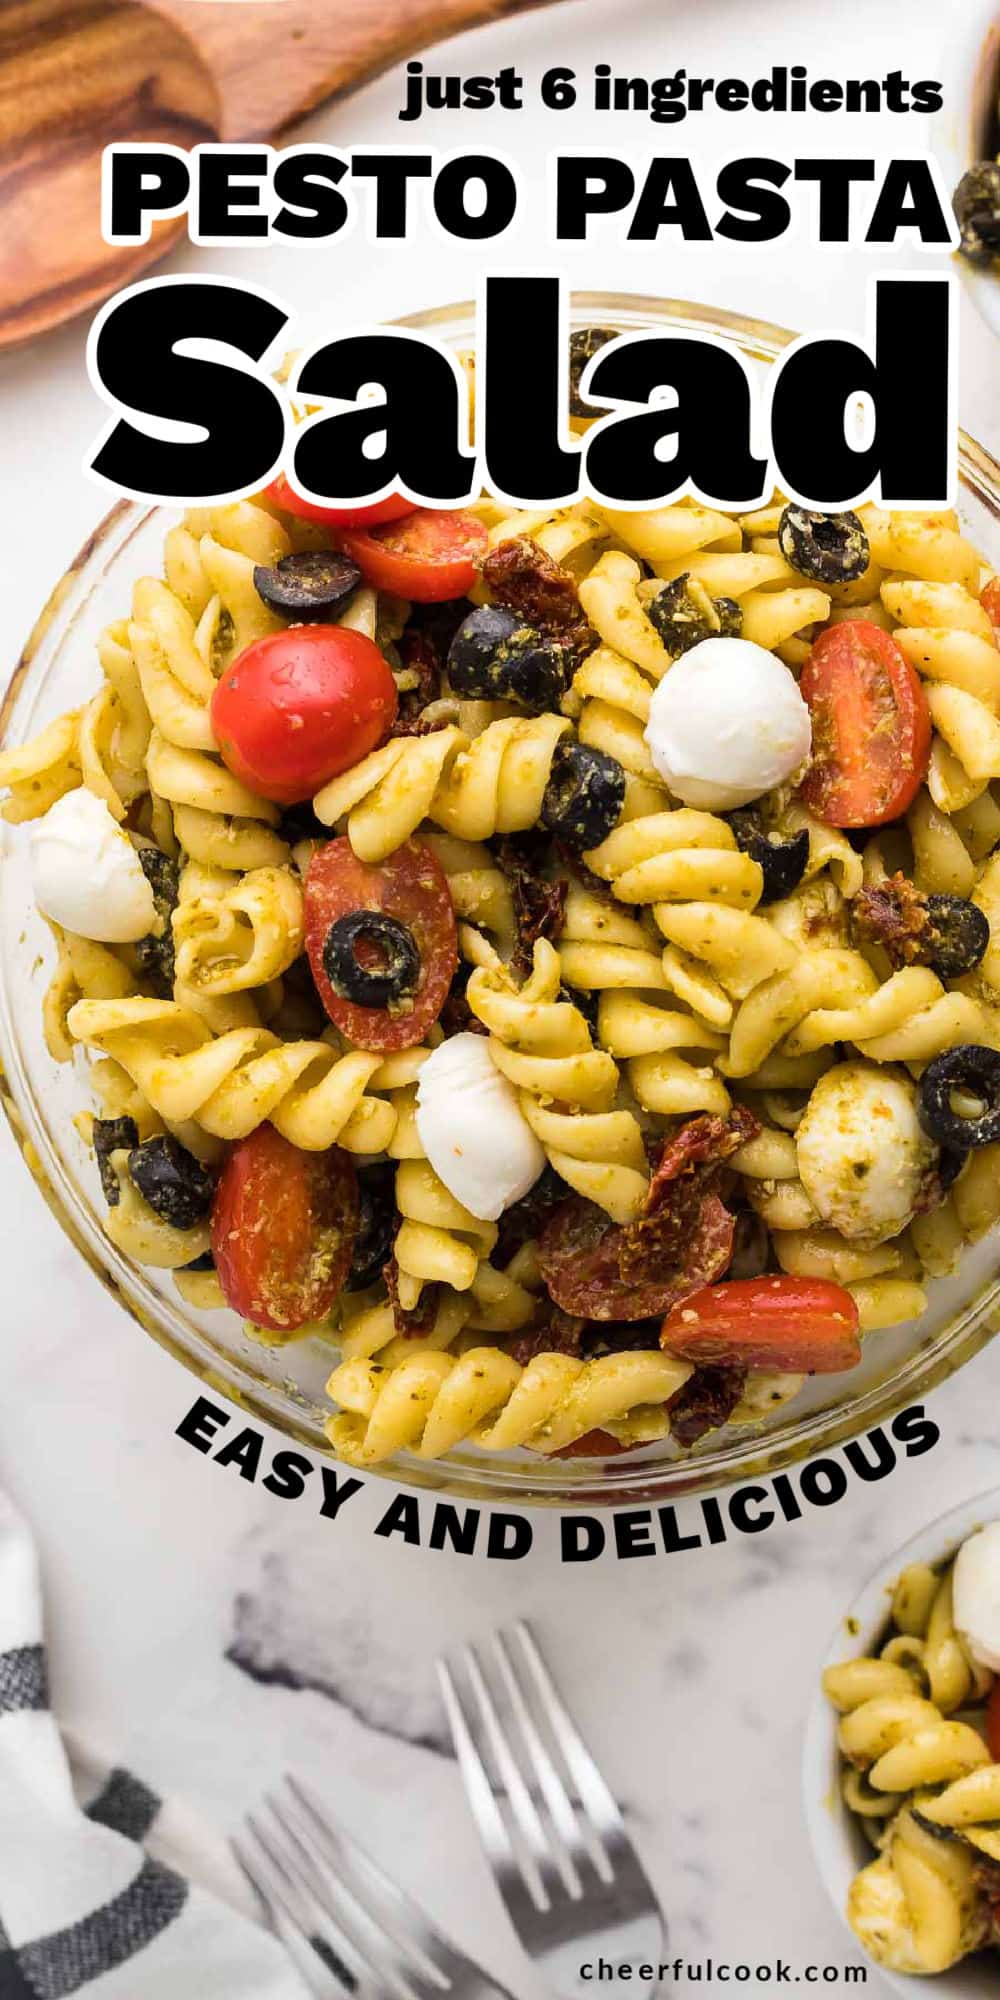 This Pesto Pasta salad is one of my favorite summer pasta salads. It's easy to make, full of rich pesto flavors, juicy tomatoes, tender mozzarella, and olives, and my secret weapon sun-dried tomatoes. You'll need just 6 super simple ingredients. And it's typically the most popular salad at any party, picnic, or potluck. #cheerfulcook #pestopastasalad #sundriedtomatoes #pesto #recipe #easy #picnics via @cheerfulcook